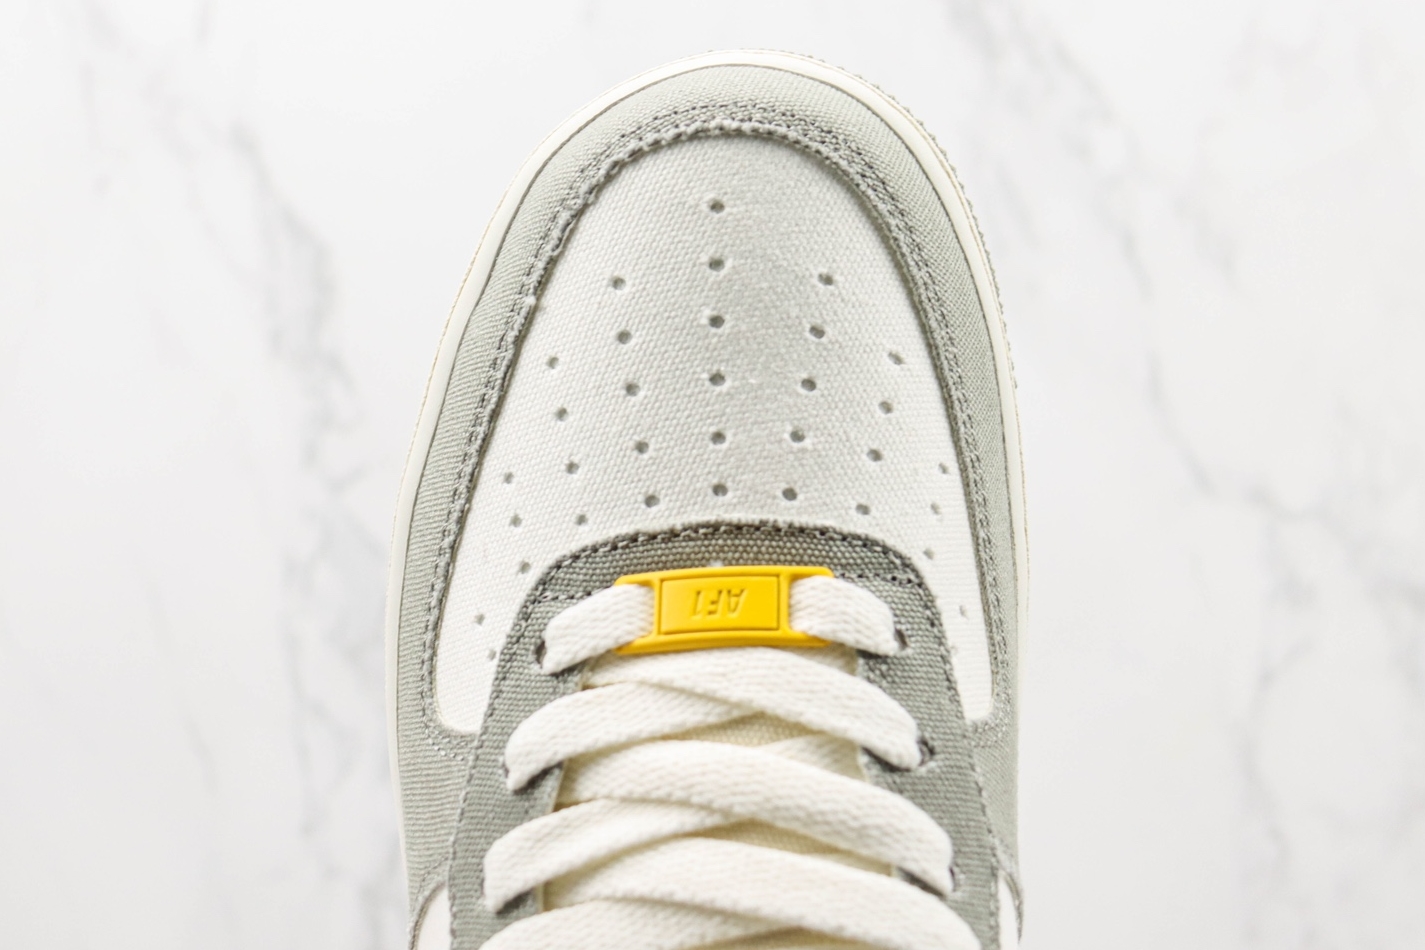 Nike Air Force 1 07 Low Grey Metallic Gold White 315122-666 - Stylish and Versatile Sneakers